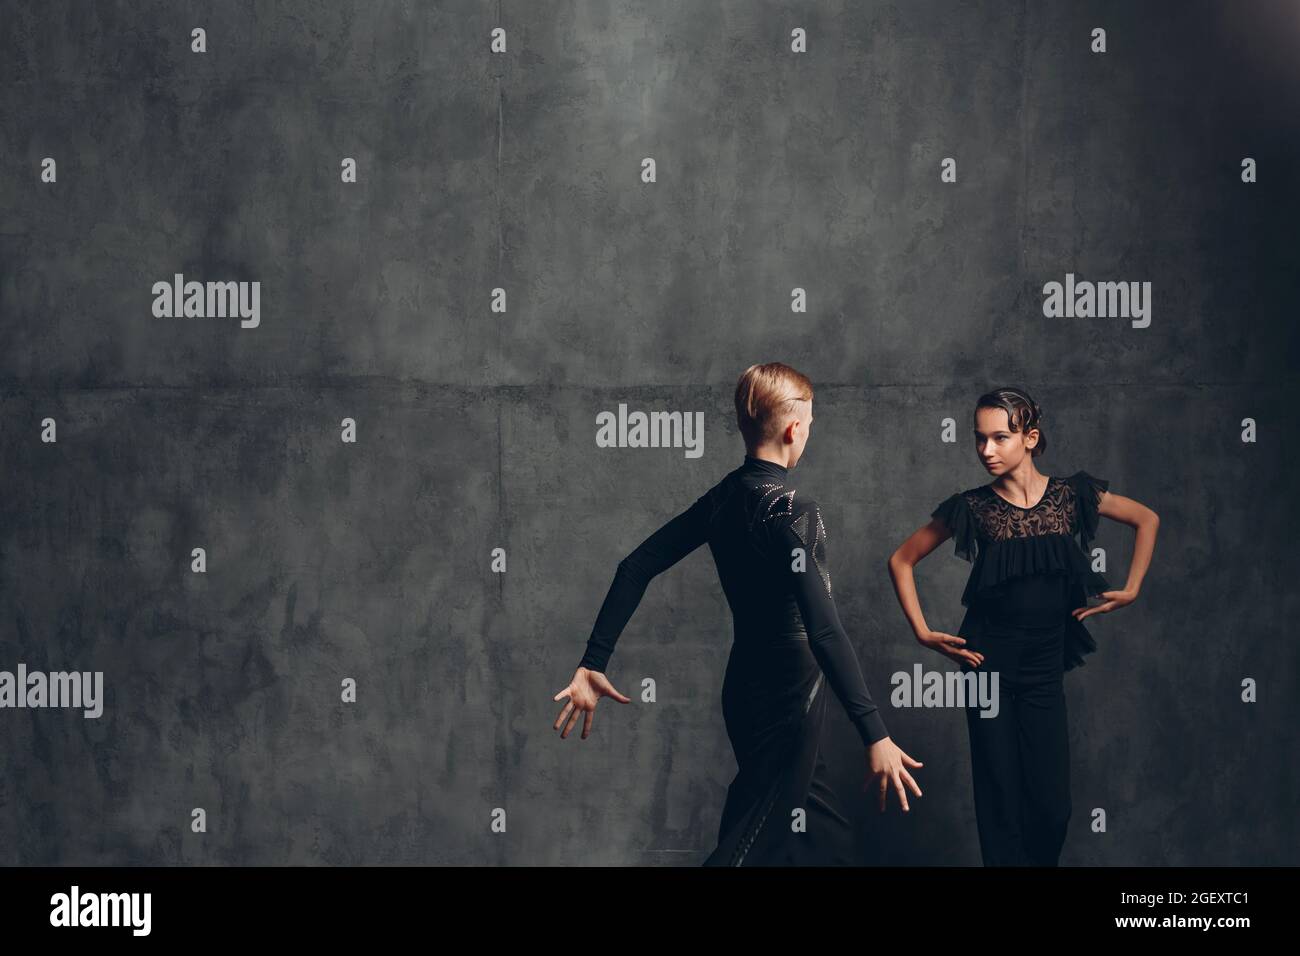 Young couple dancing in ballroom dance Paso doble. Stock Photo